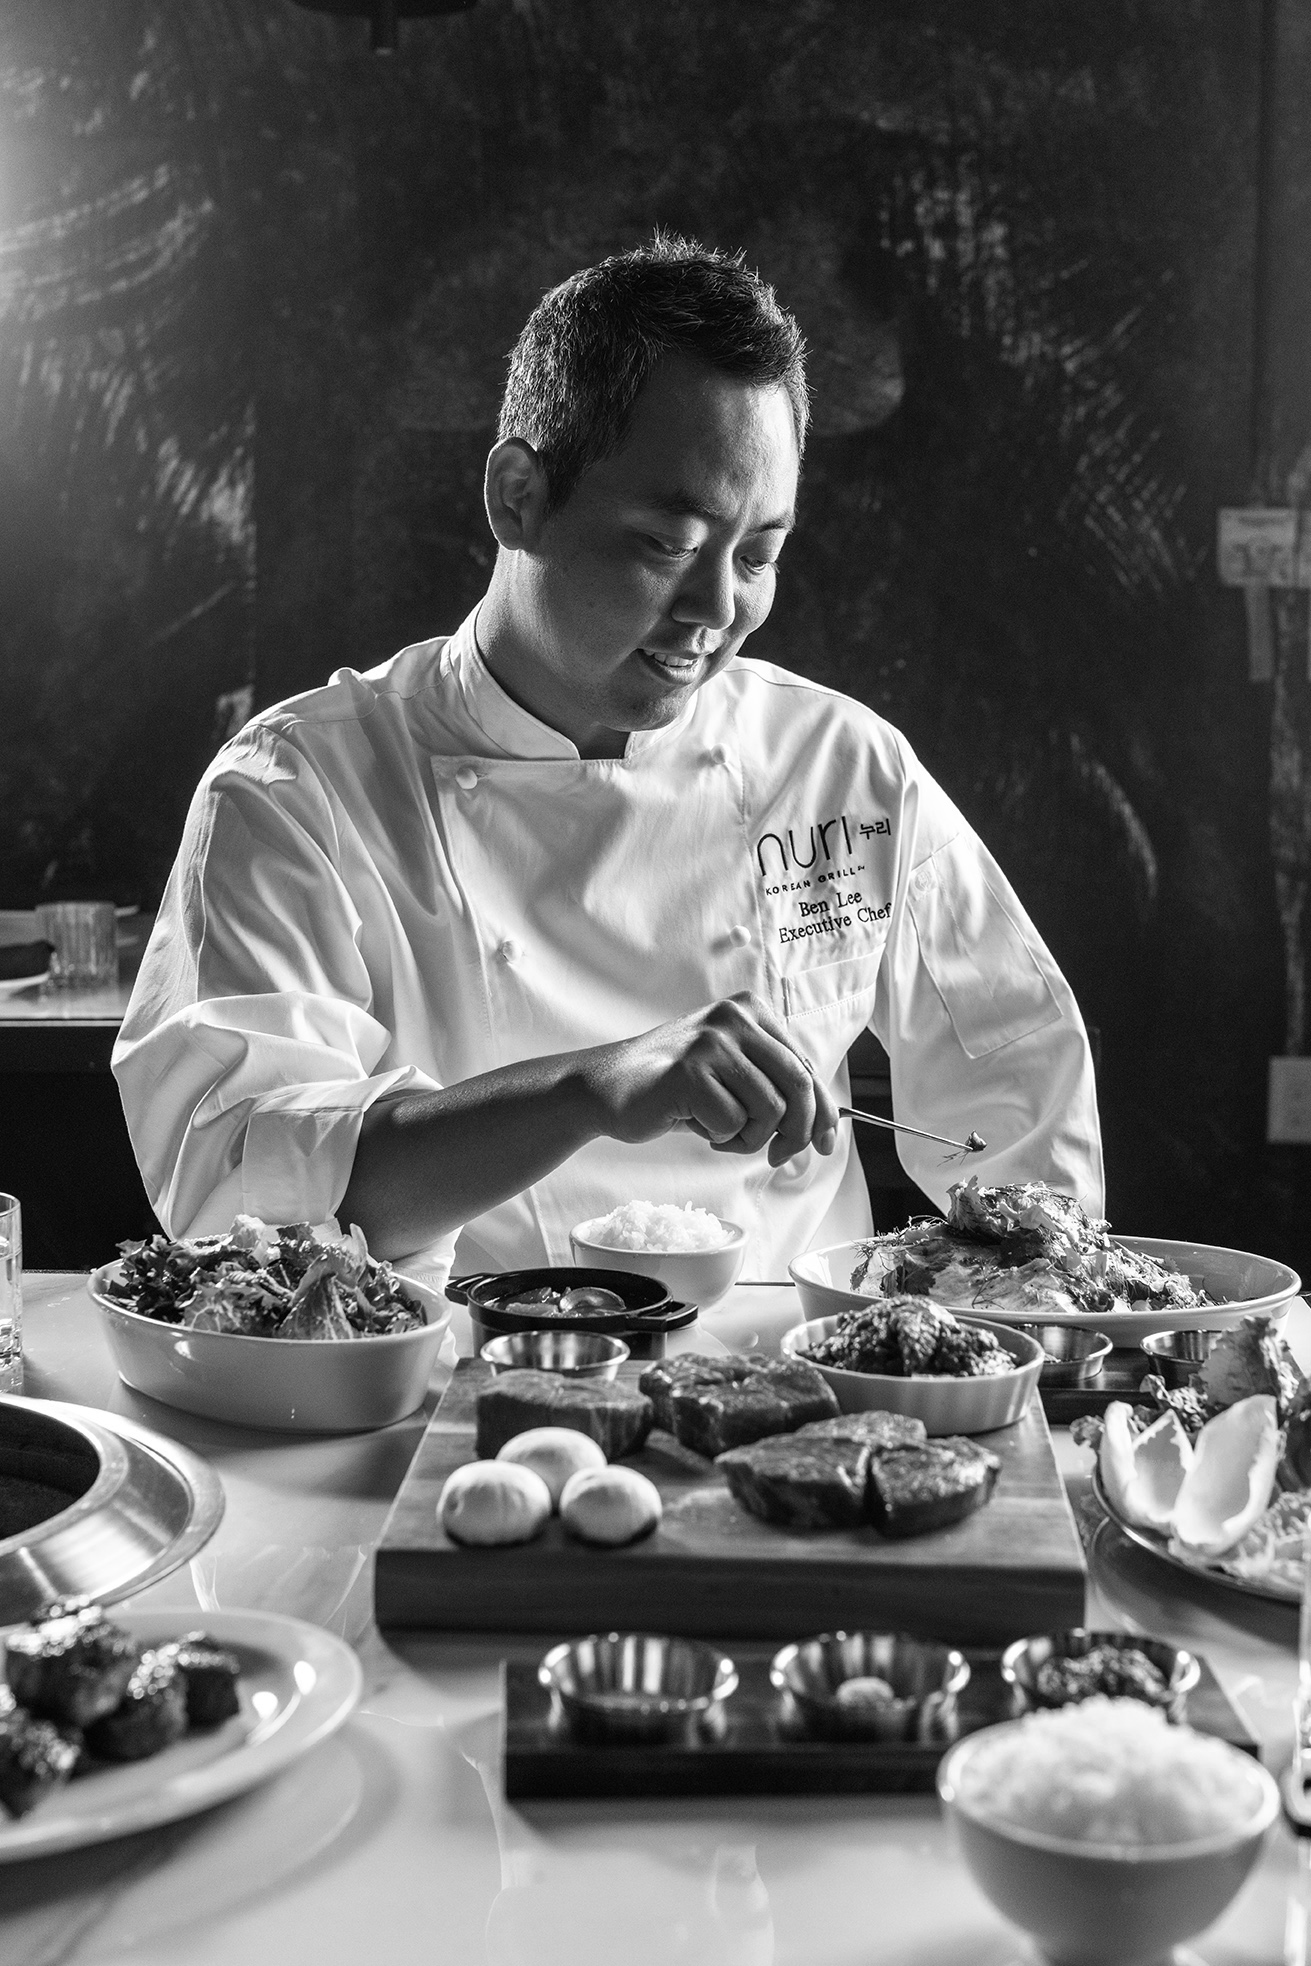 chef ben lee assembling multiple nuri dishes at table